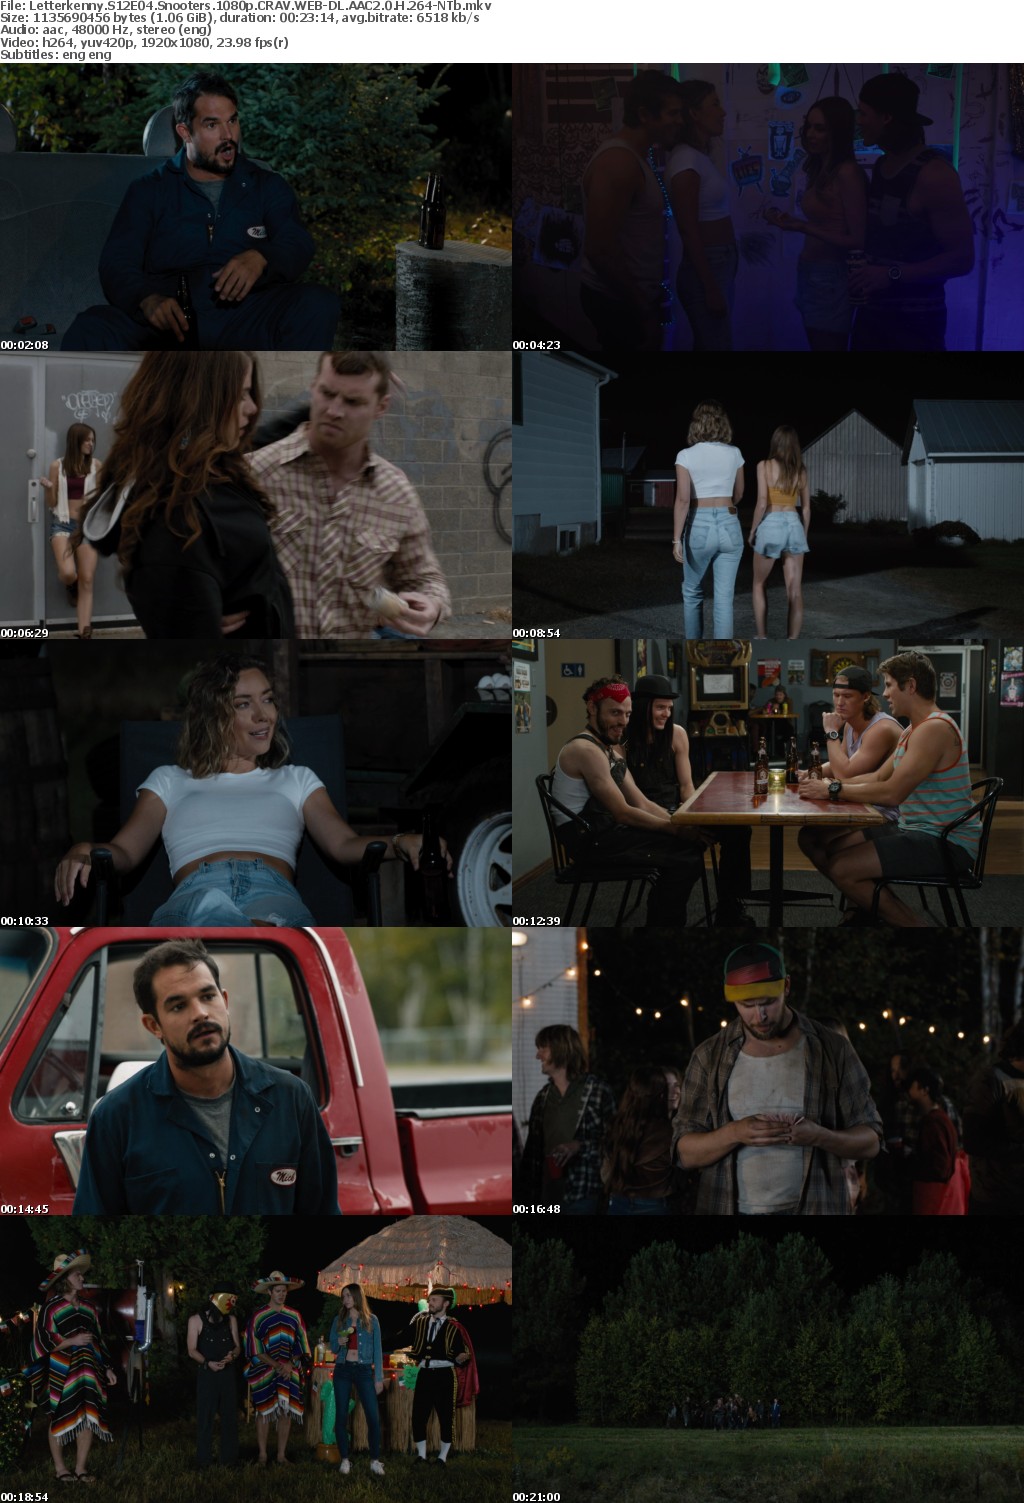 Letterkenny S12E04 Snooters 1080p CRAV WEB-DL AAC2 0 H 264-NTb